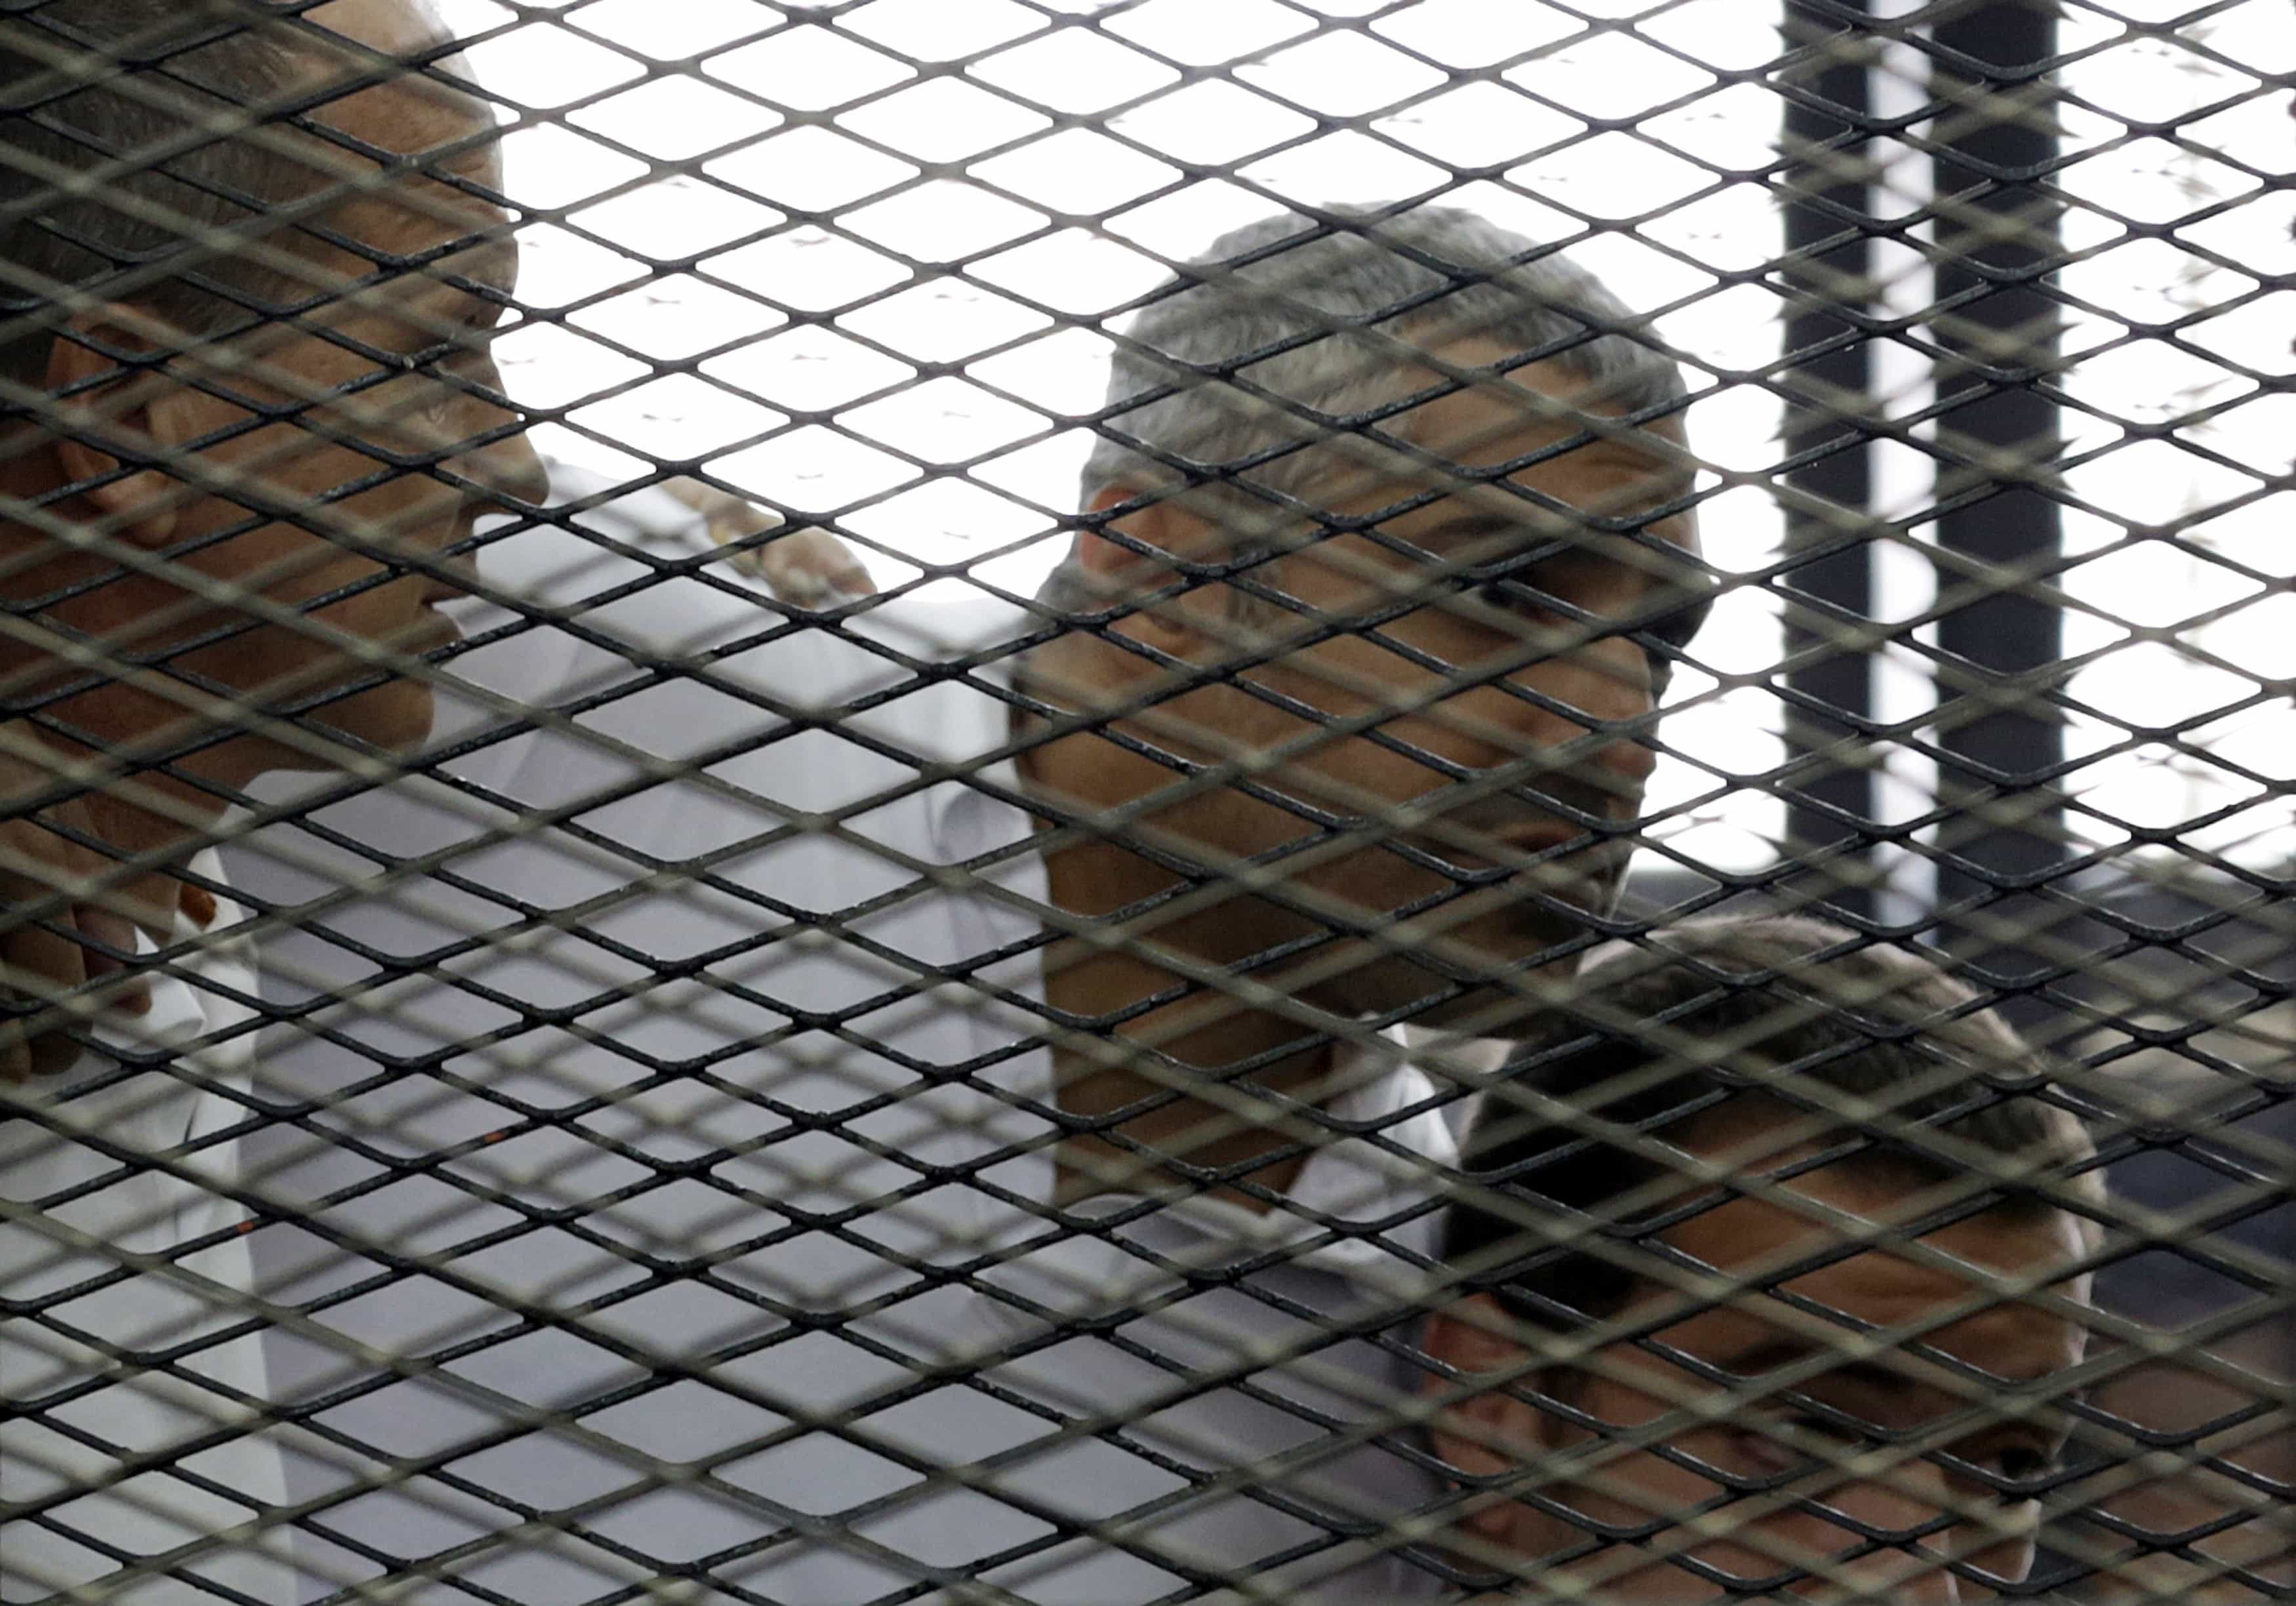 Peter Greste, Mohamed Fahmy and Baher Mohamed (L to R) listen to a ruling at a court in Cairo, 23 June 2014, REUTERS/Asmaa Waguih